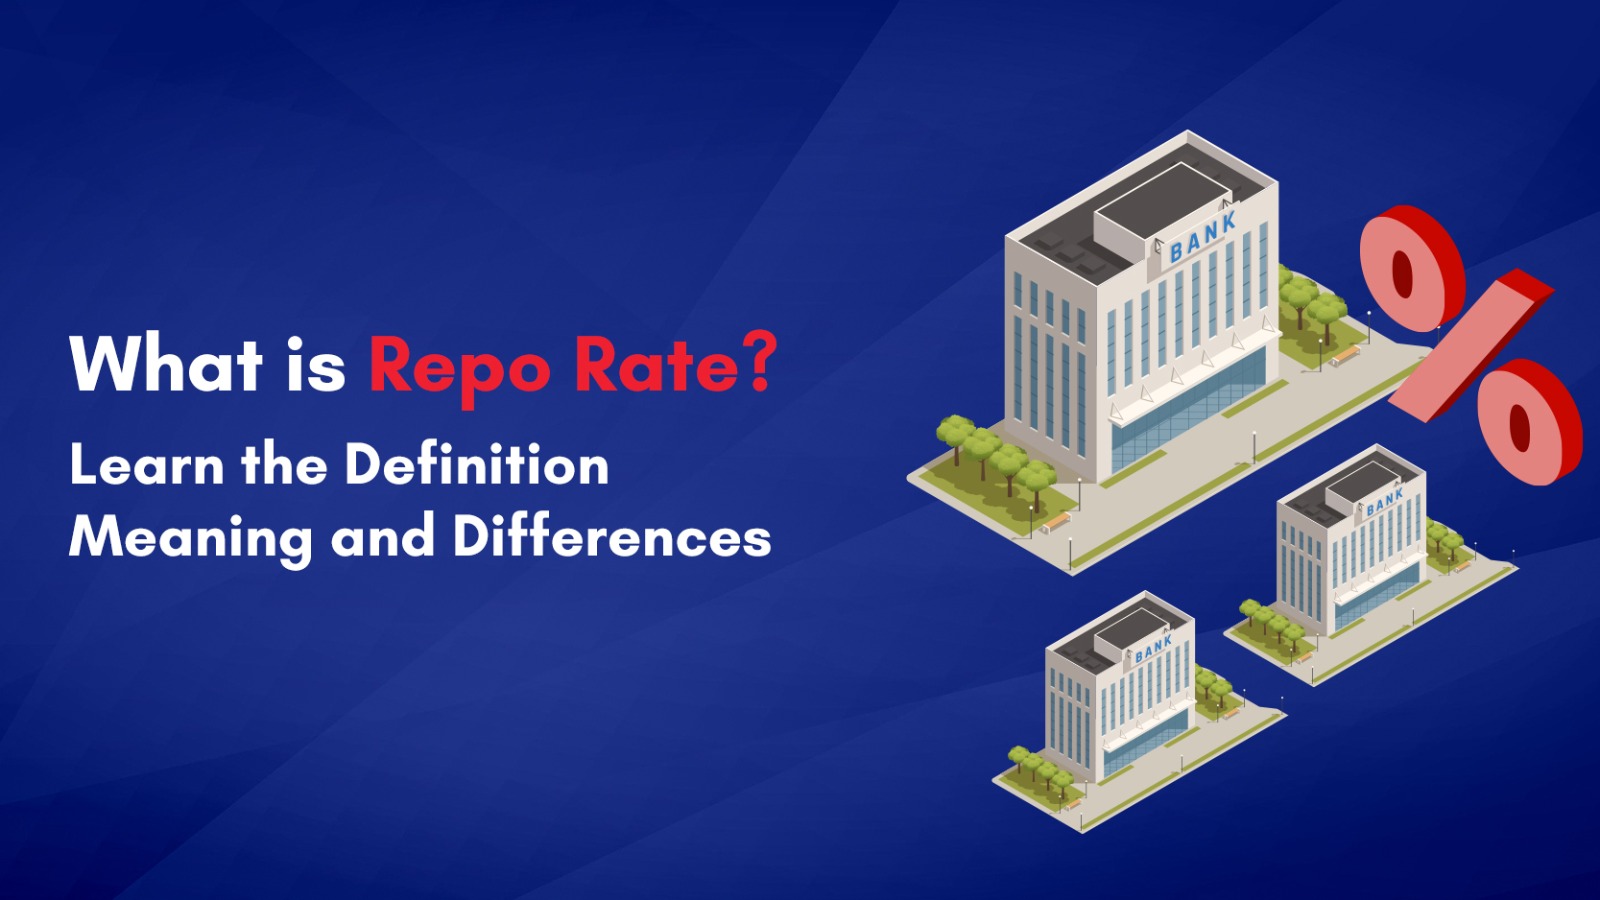 What is Repo Rate? Learn the Definition, Meaning and Differences